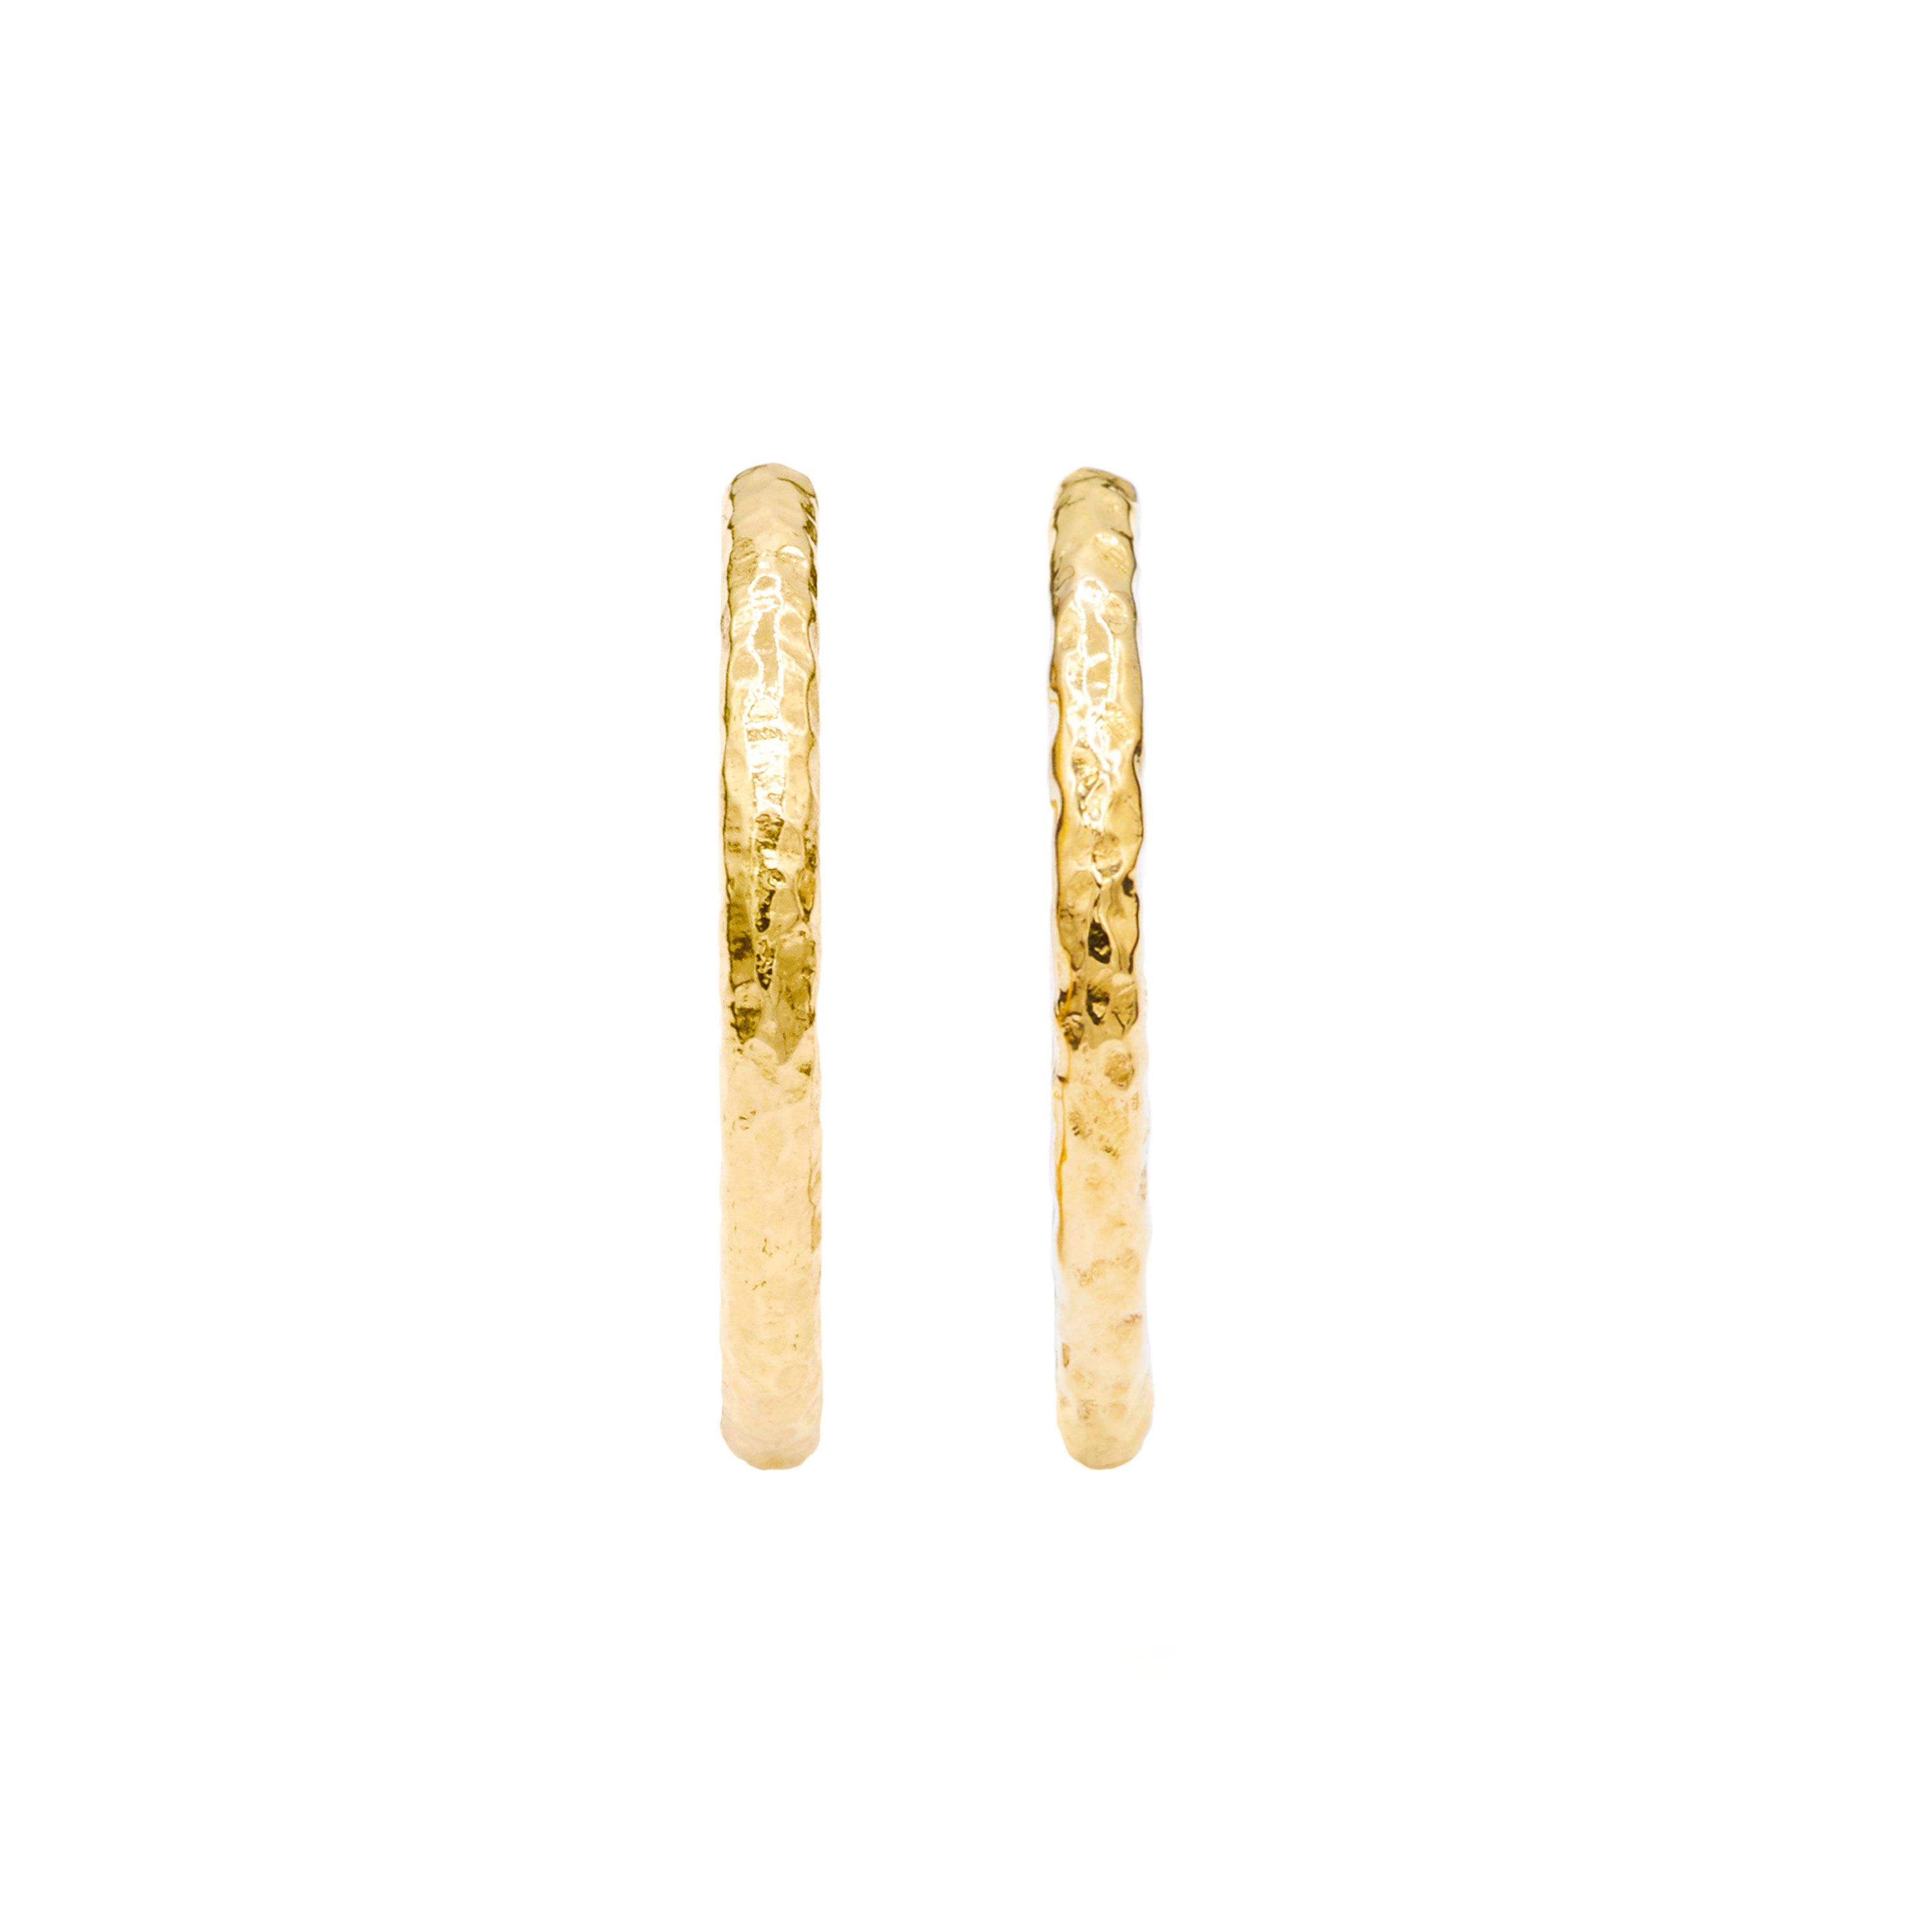 Product Image for Gabby Hoops, Yellow Gold